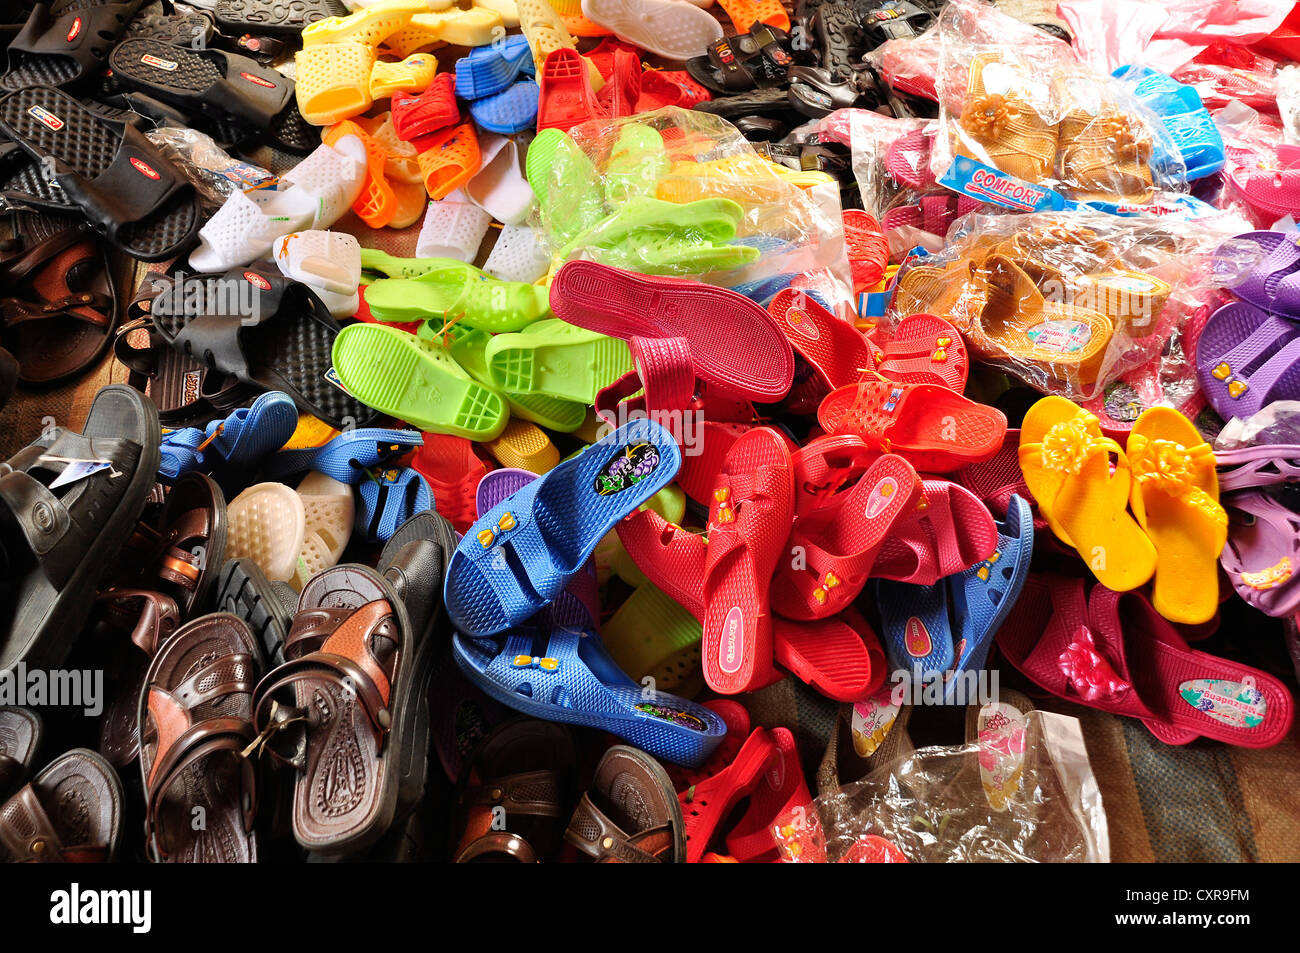 Colourful plastic sandals for sale at a market, Can Cau, Northern Vietnam, Vietnam, Southeast Asia, Asia Stock Photo